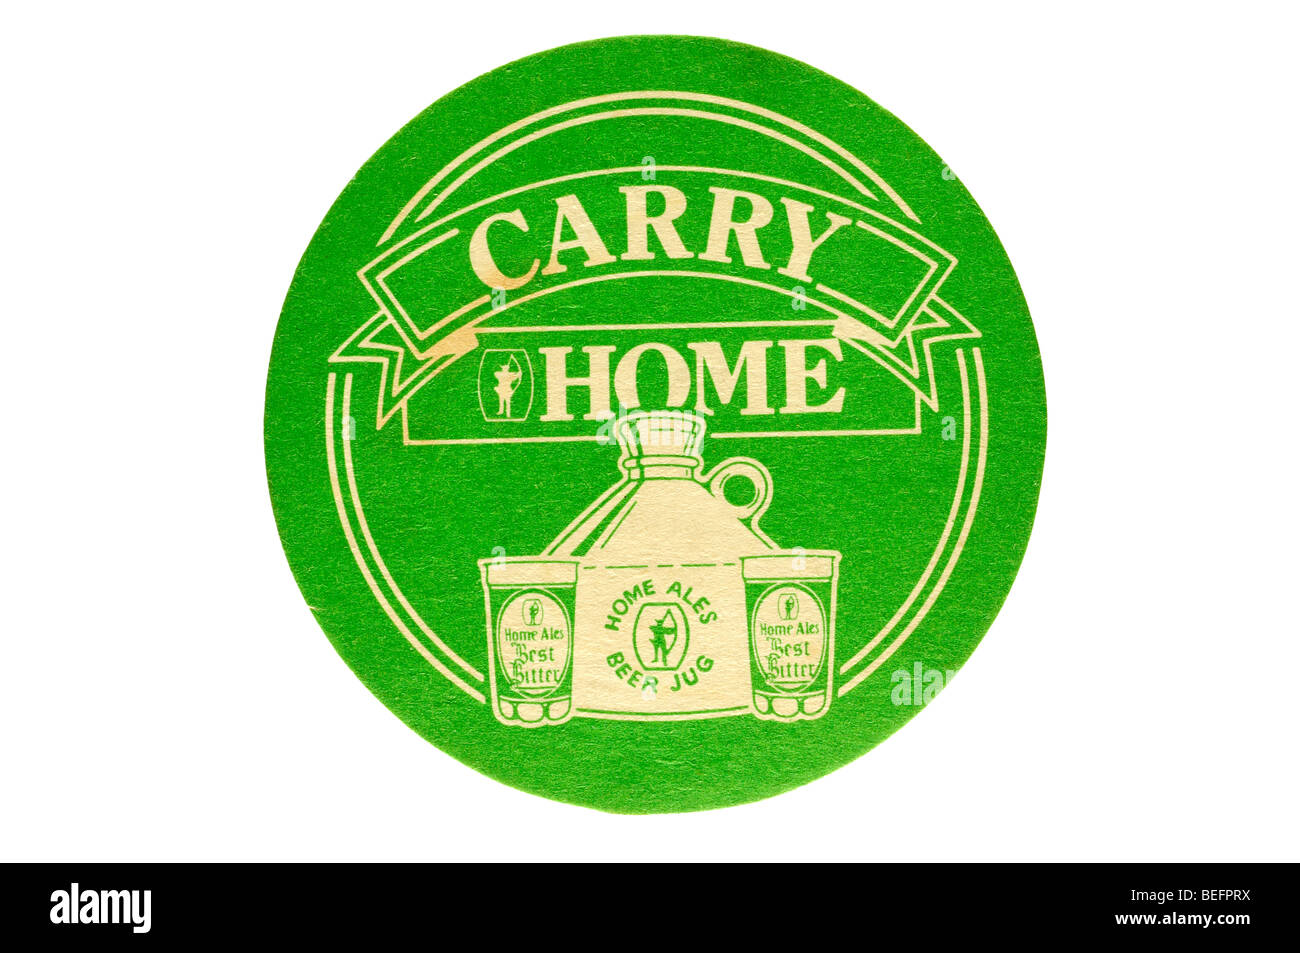 carry home home ales beer jug Stock Photo